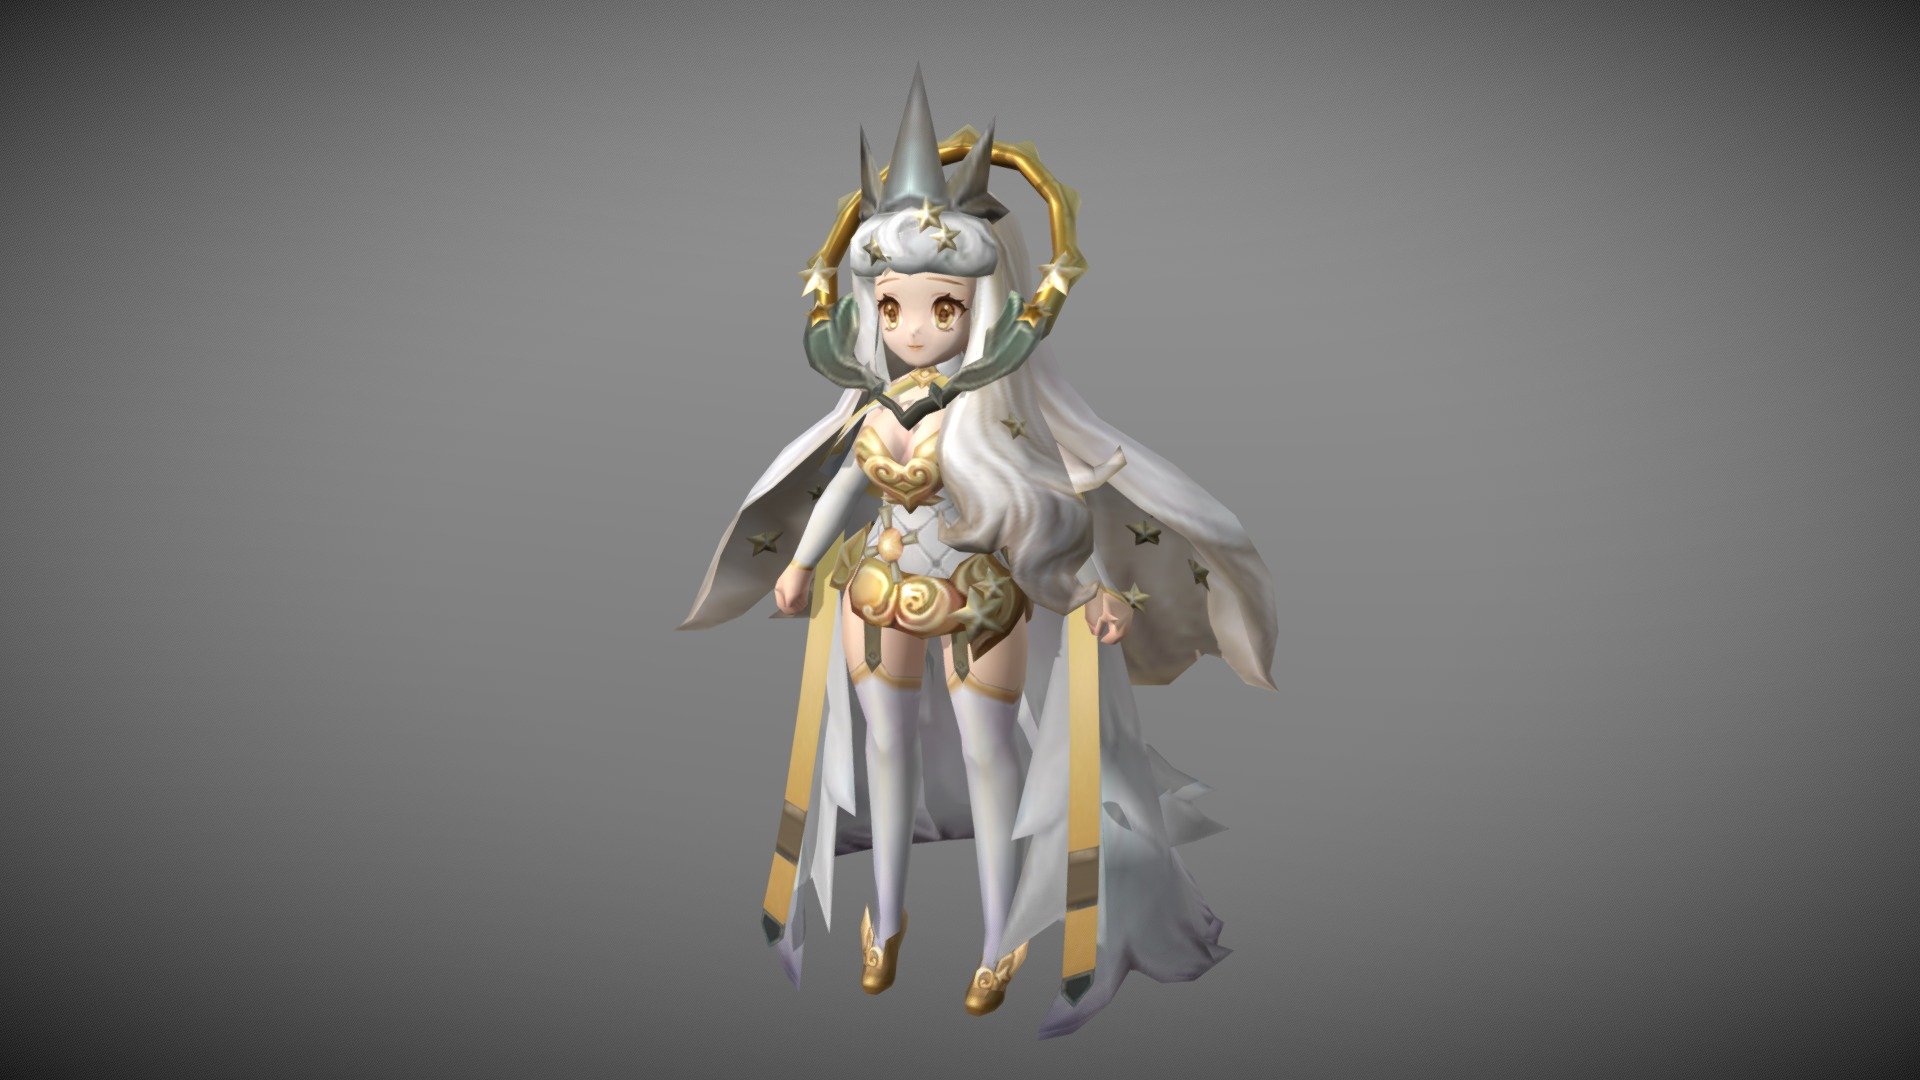 low poly for mobile game character

texture size : 256*256 - Mobile game character - 3D model by MichelleYang513 (@vita513) 3d model